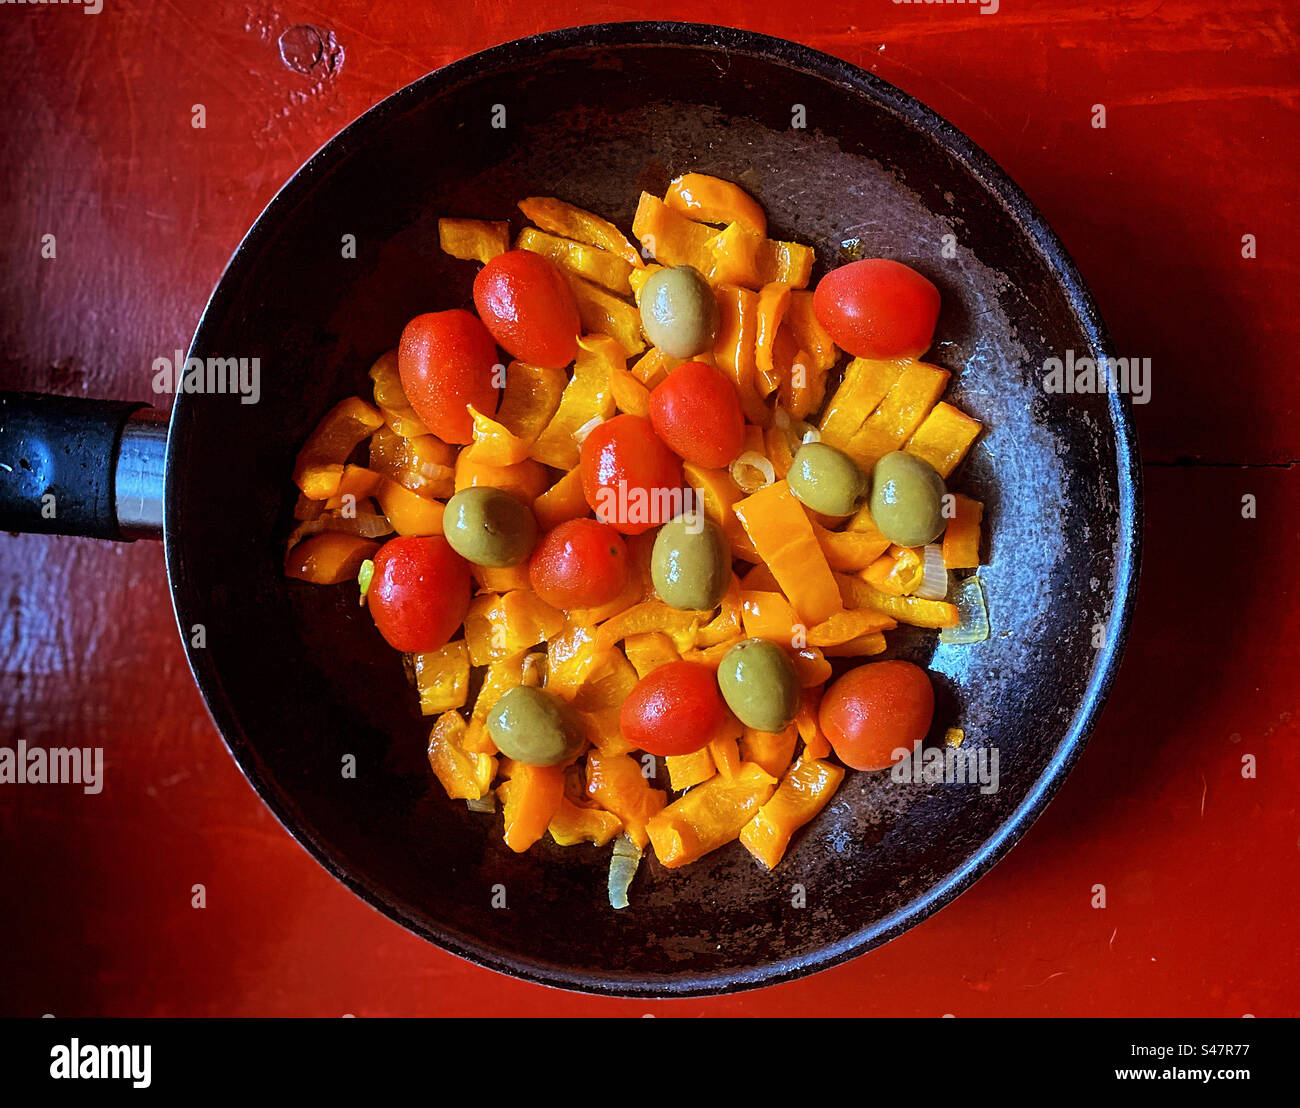 Orange sweet pepper, olives and small red tomatoes in a pot ready tonbe cooked in Queretaro, Mexico Stock Photo